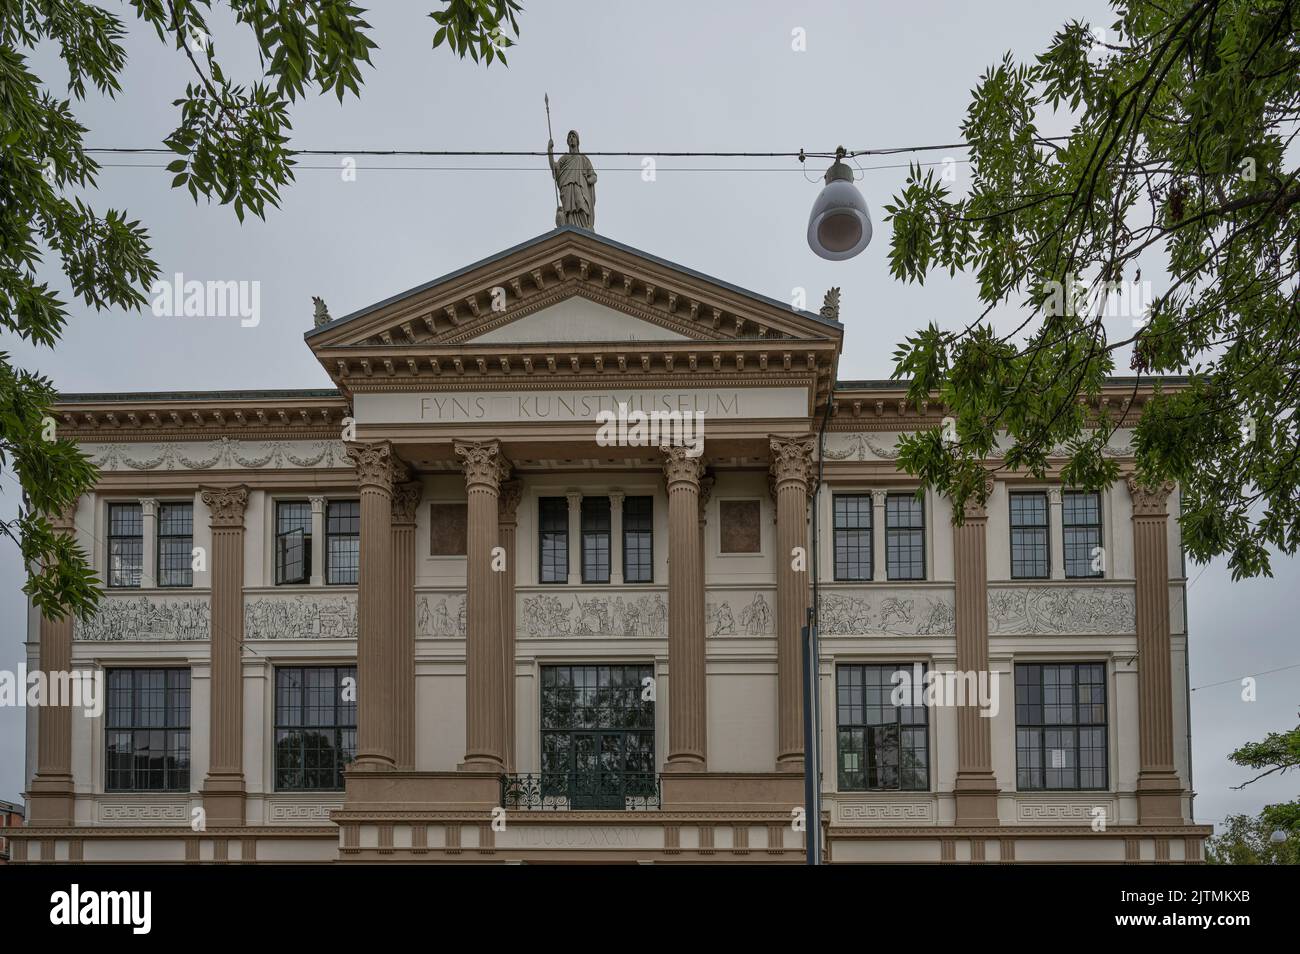 Funen's Art Museum with a decorated frieze in a neo-classical building from 1885, Odense, Denmark, August 28, 2022 Stock Photo